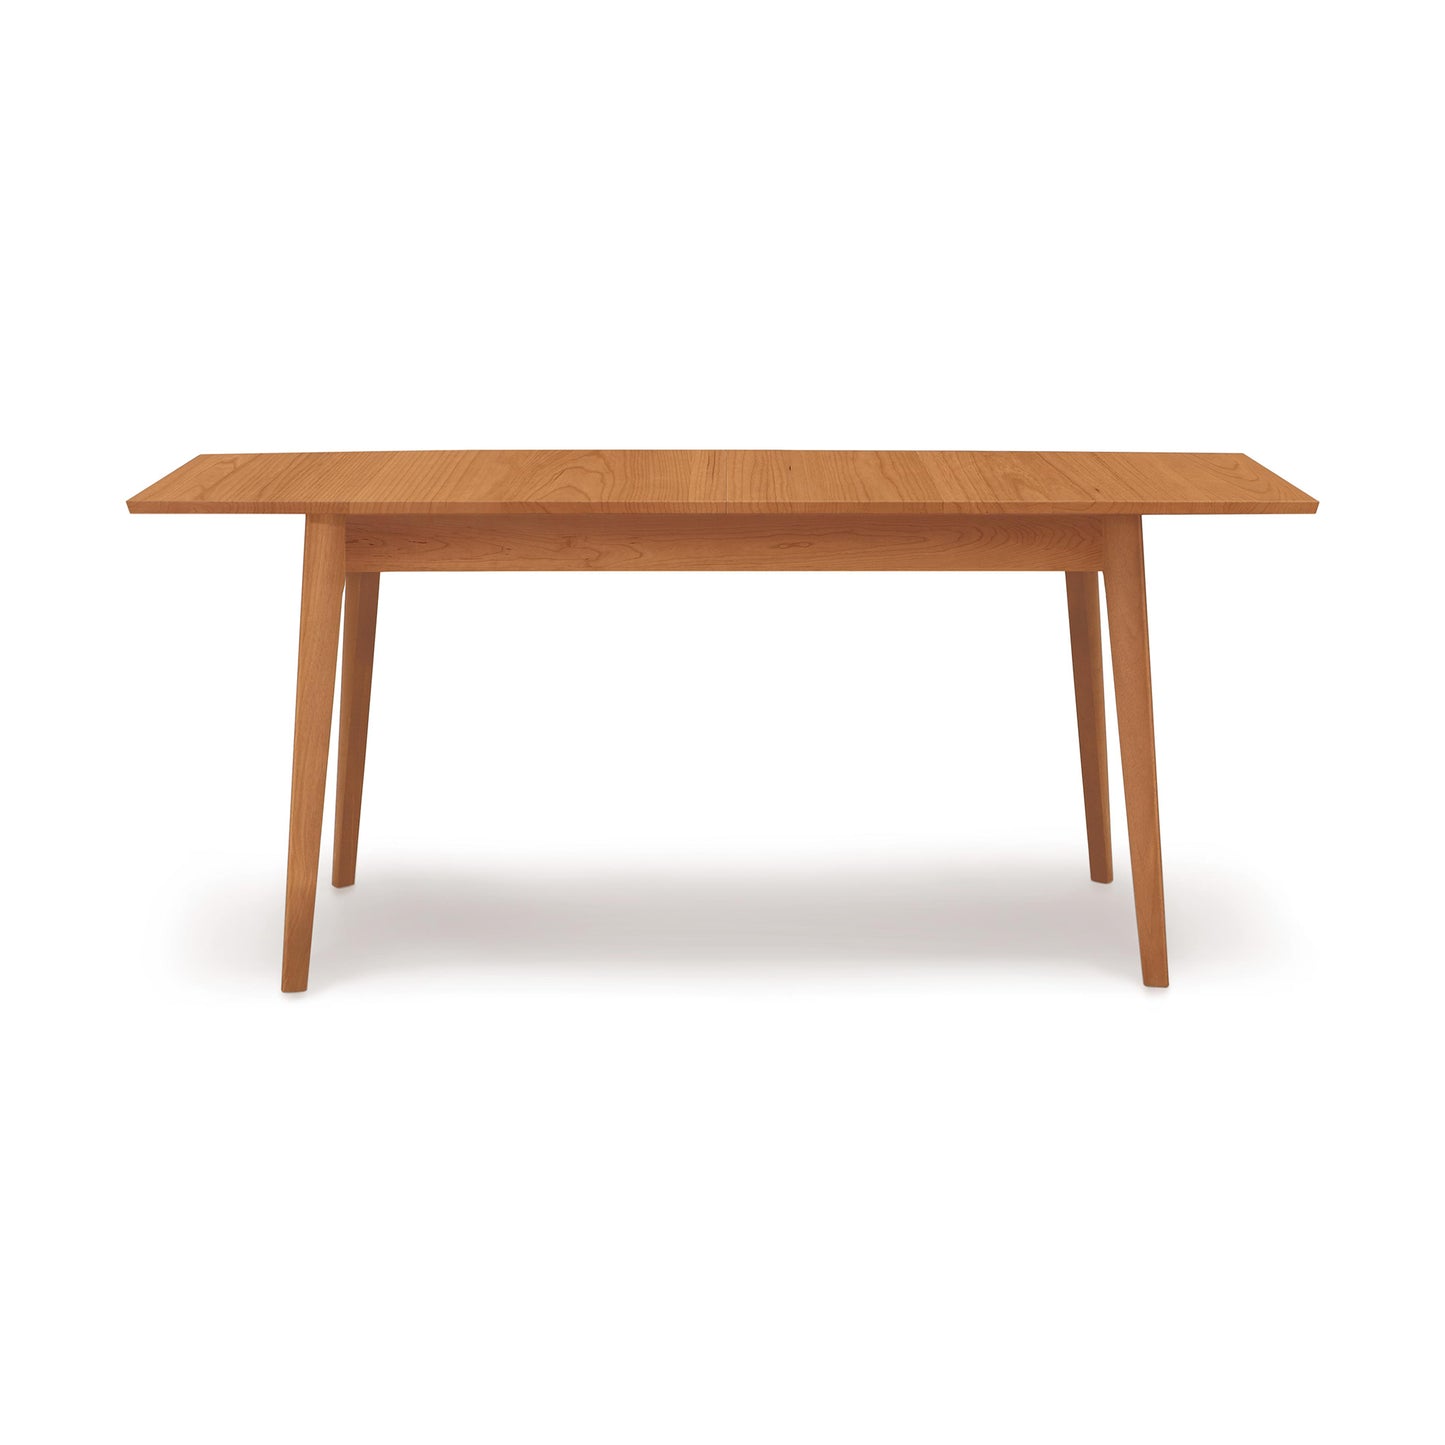 A simple Catalina Extension Table from Copeland Furniture, with four legs, isolated on a white background.